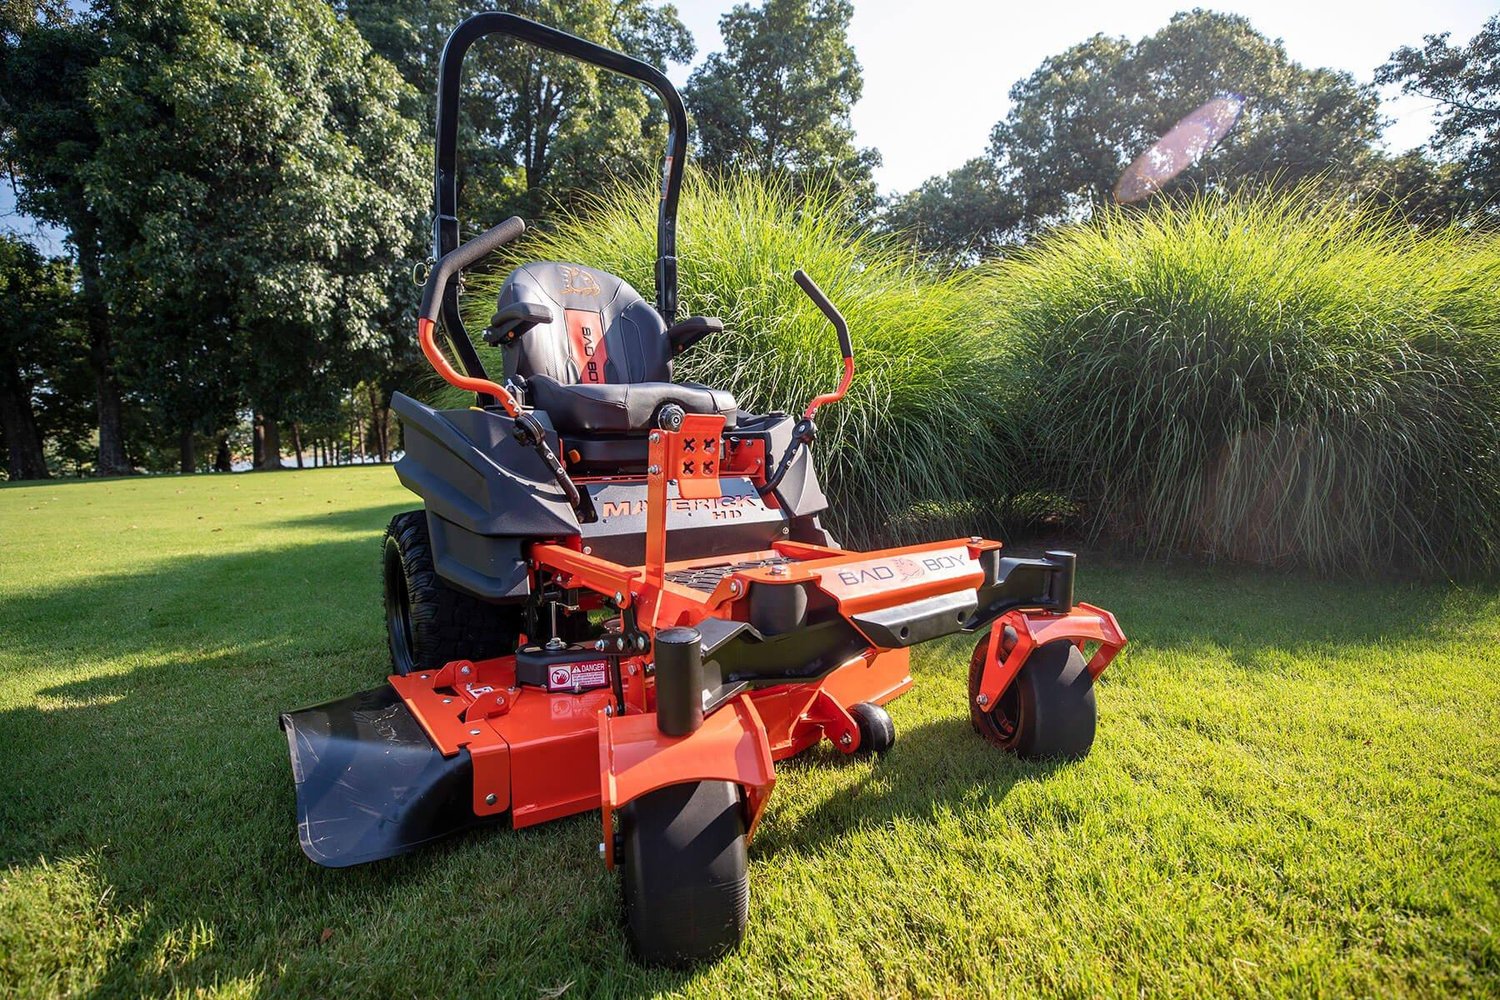 Differences Between Zero-Turn and Standard Riding Lawn Mowers